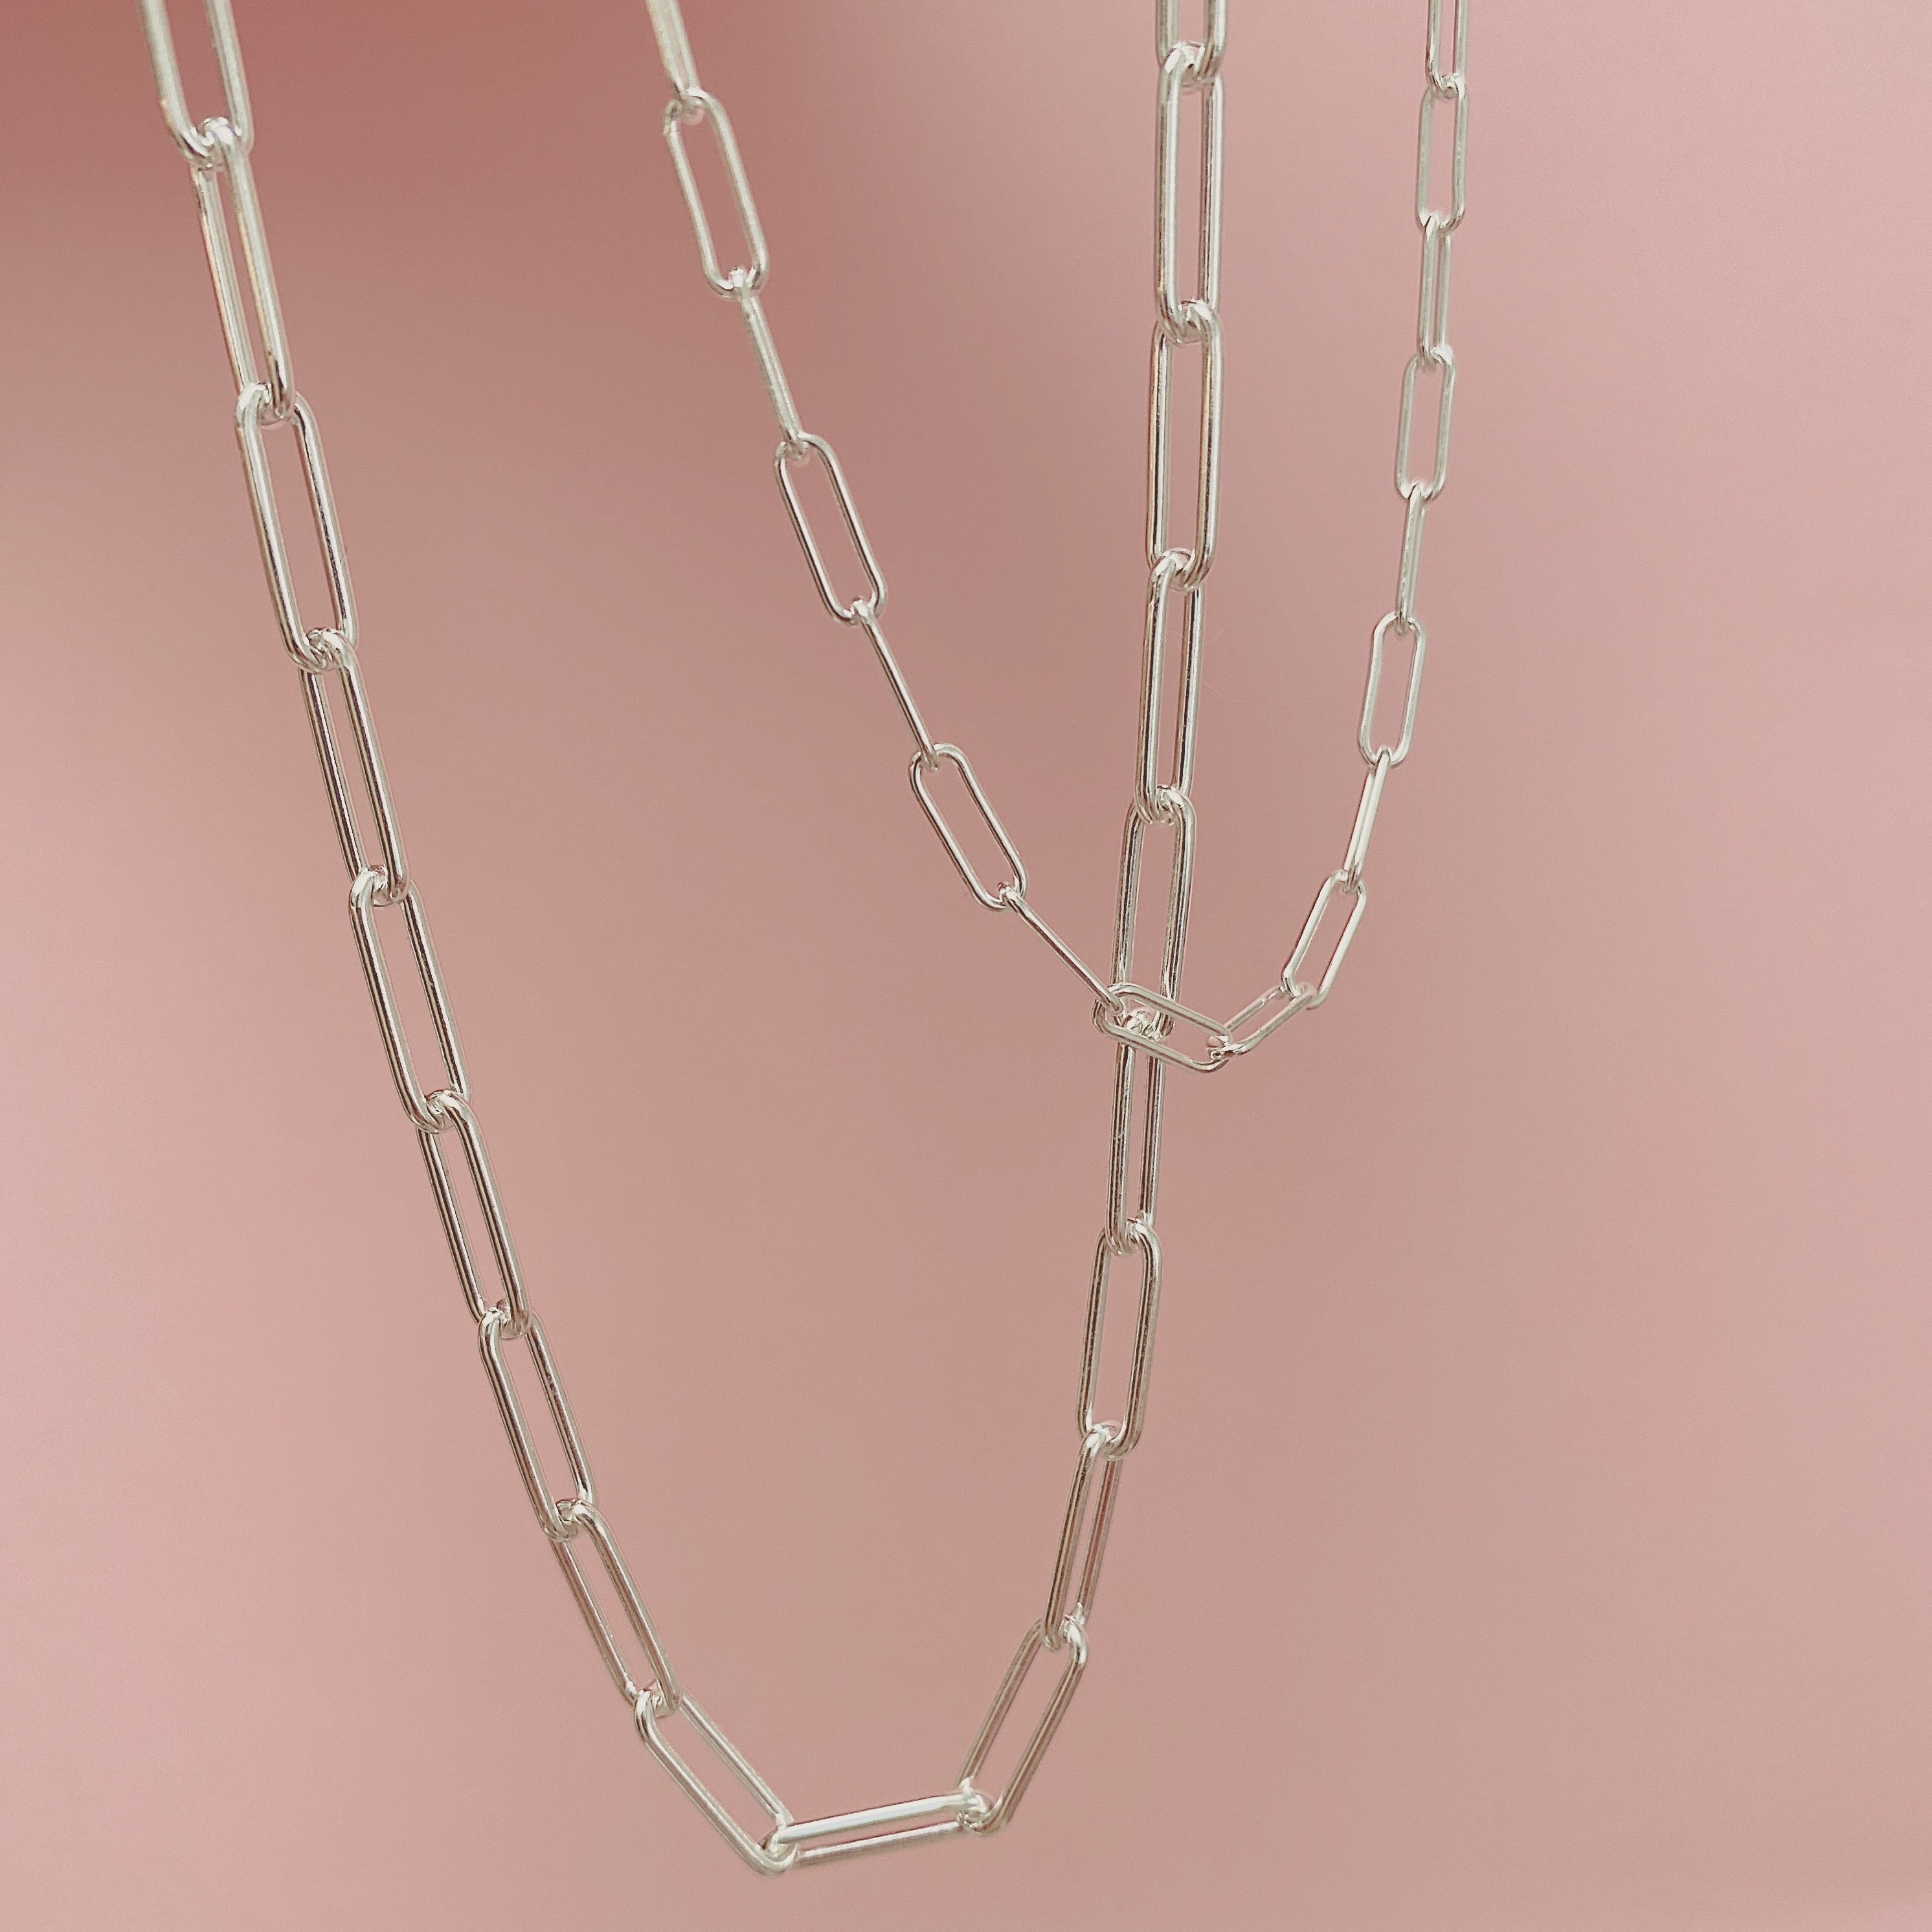 The Paperclip Chain 2.0